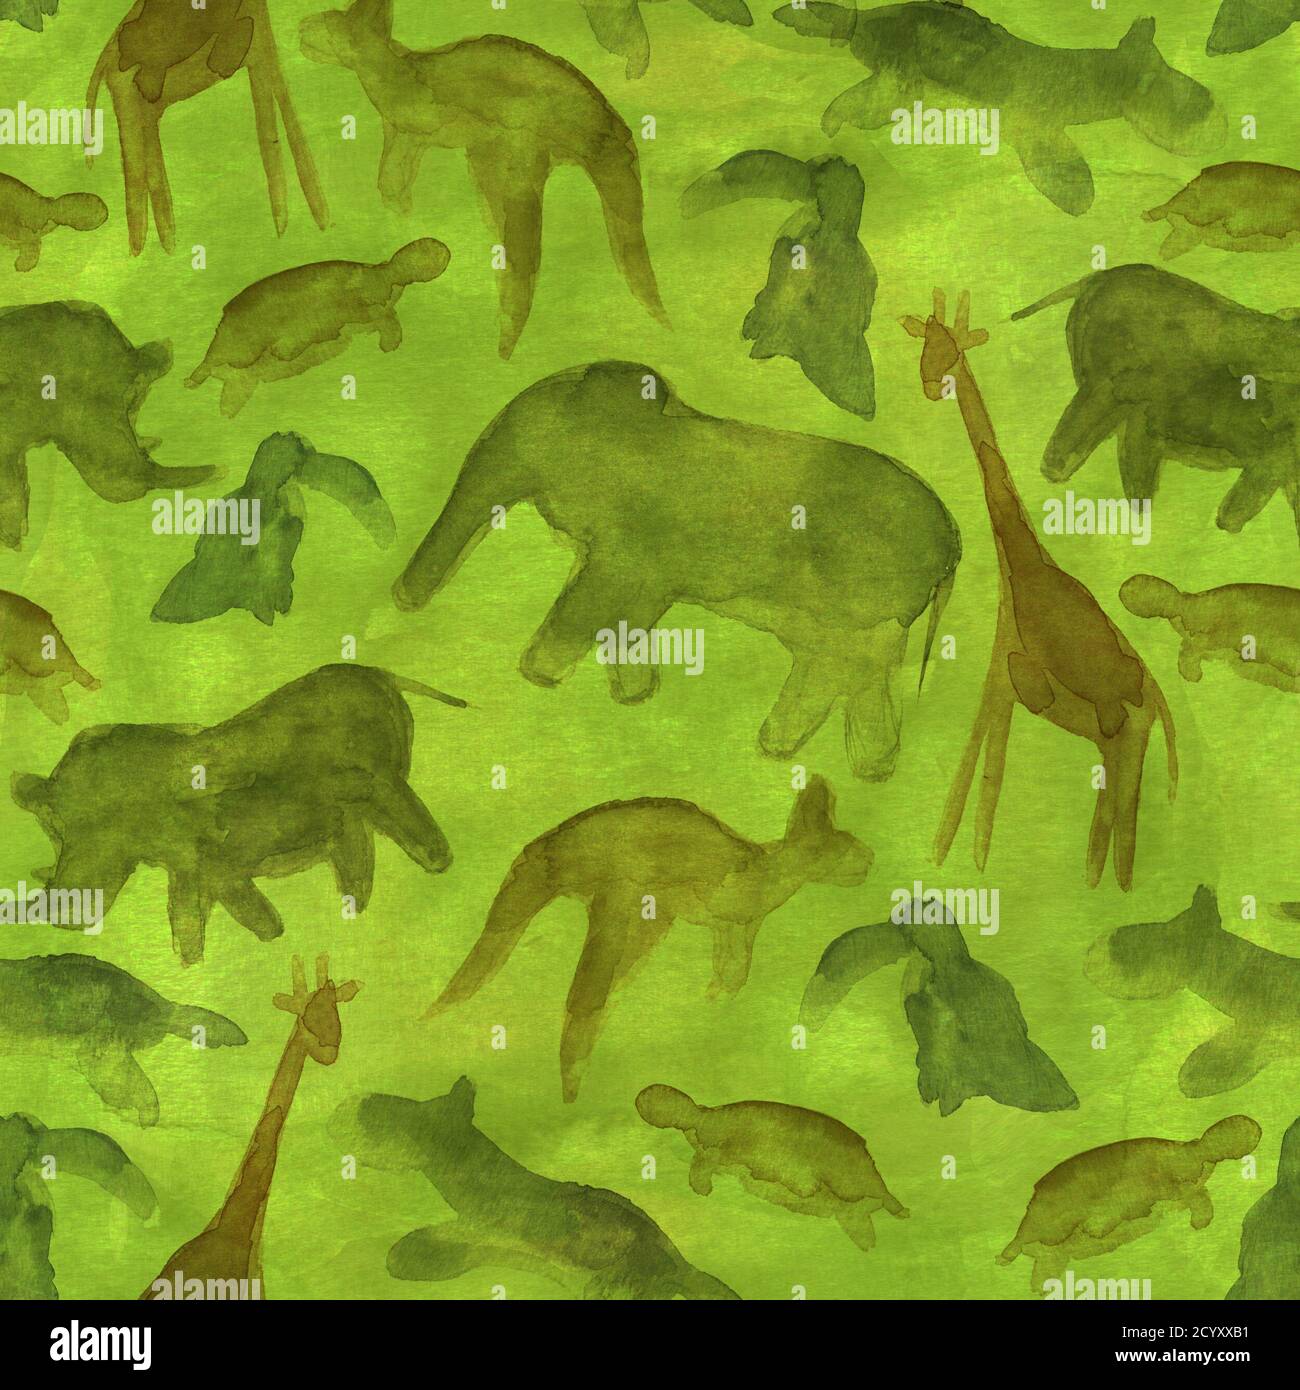 Animals abstract background. Seamless silhouette wildlife pattern. Brown,  green, gray and lemon yellow color. Watercolor hand drawn illustration.  Sket Stock Photo - Alamy